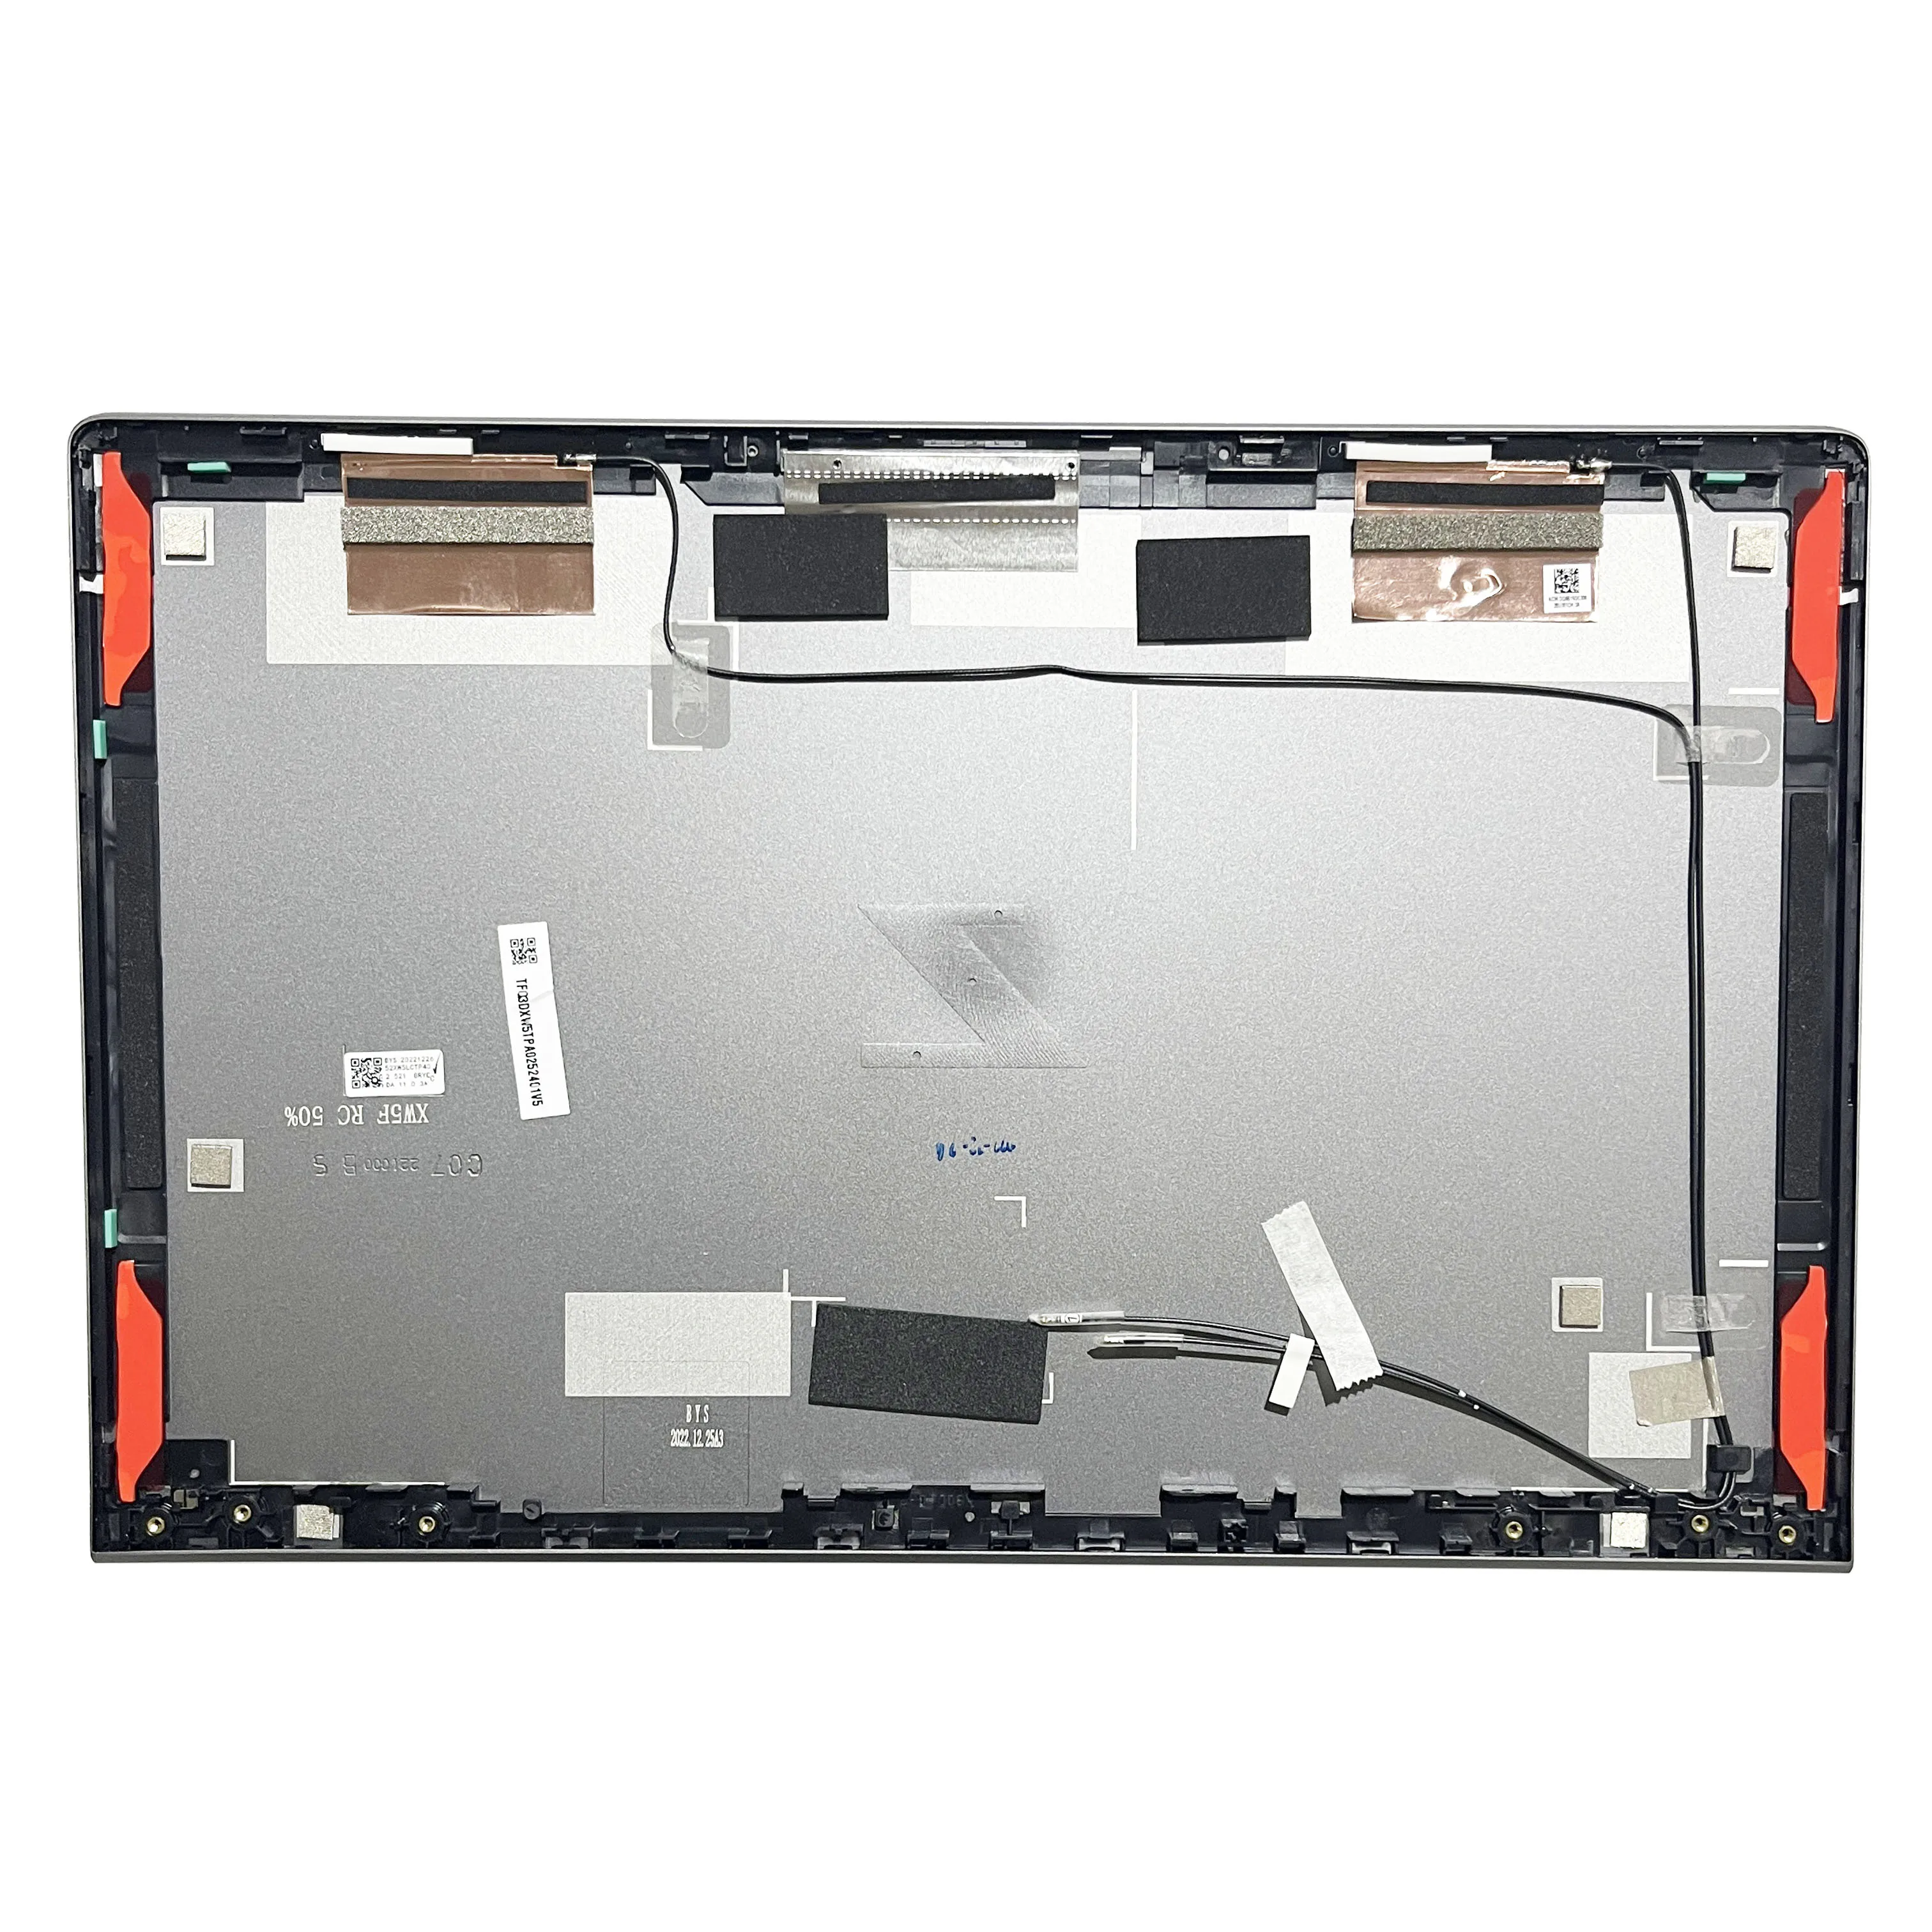 New Original For Zbook15 Power G7 G8 Screen LCD Rear Lid Top Back Cover Case A Shell XW5BATP20